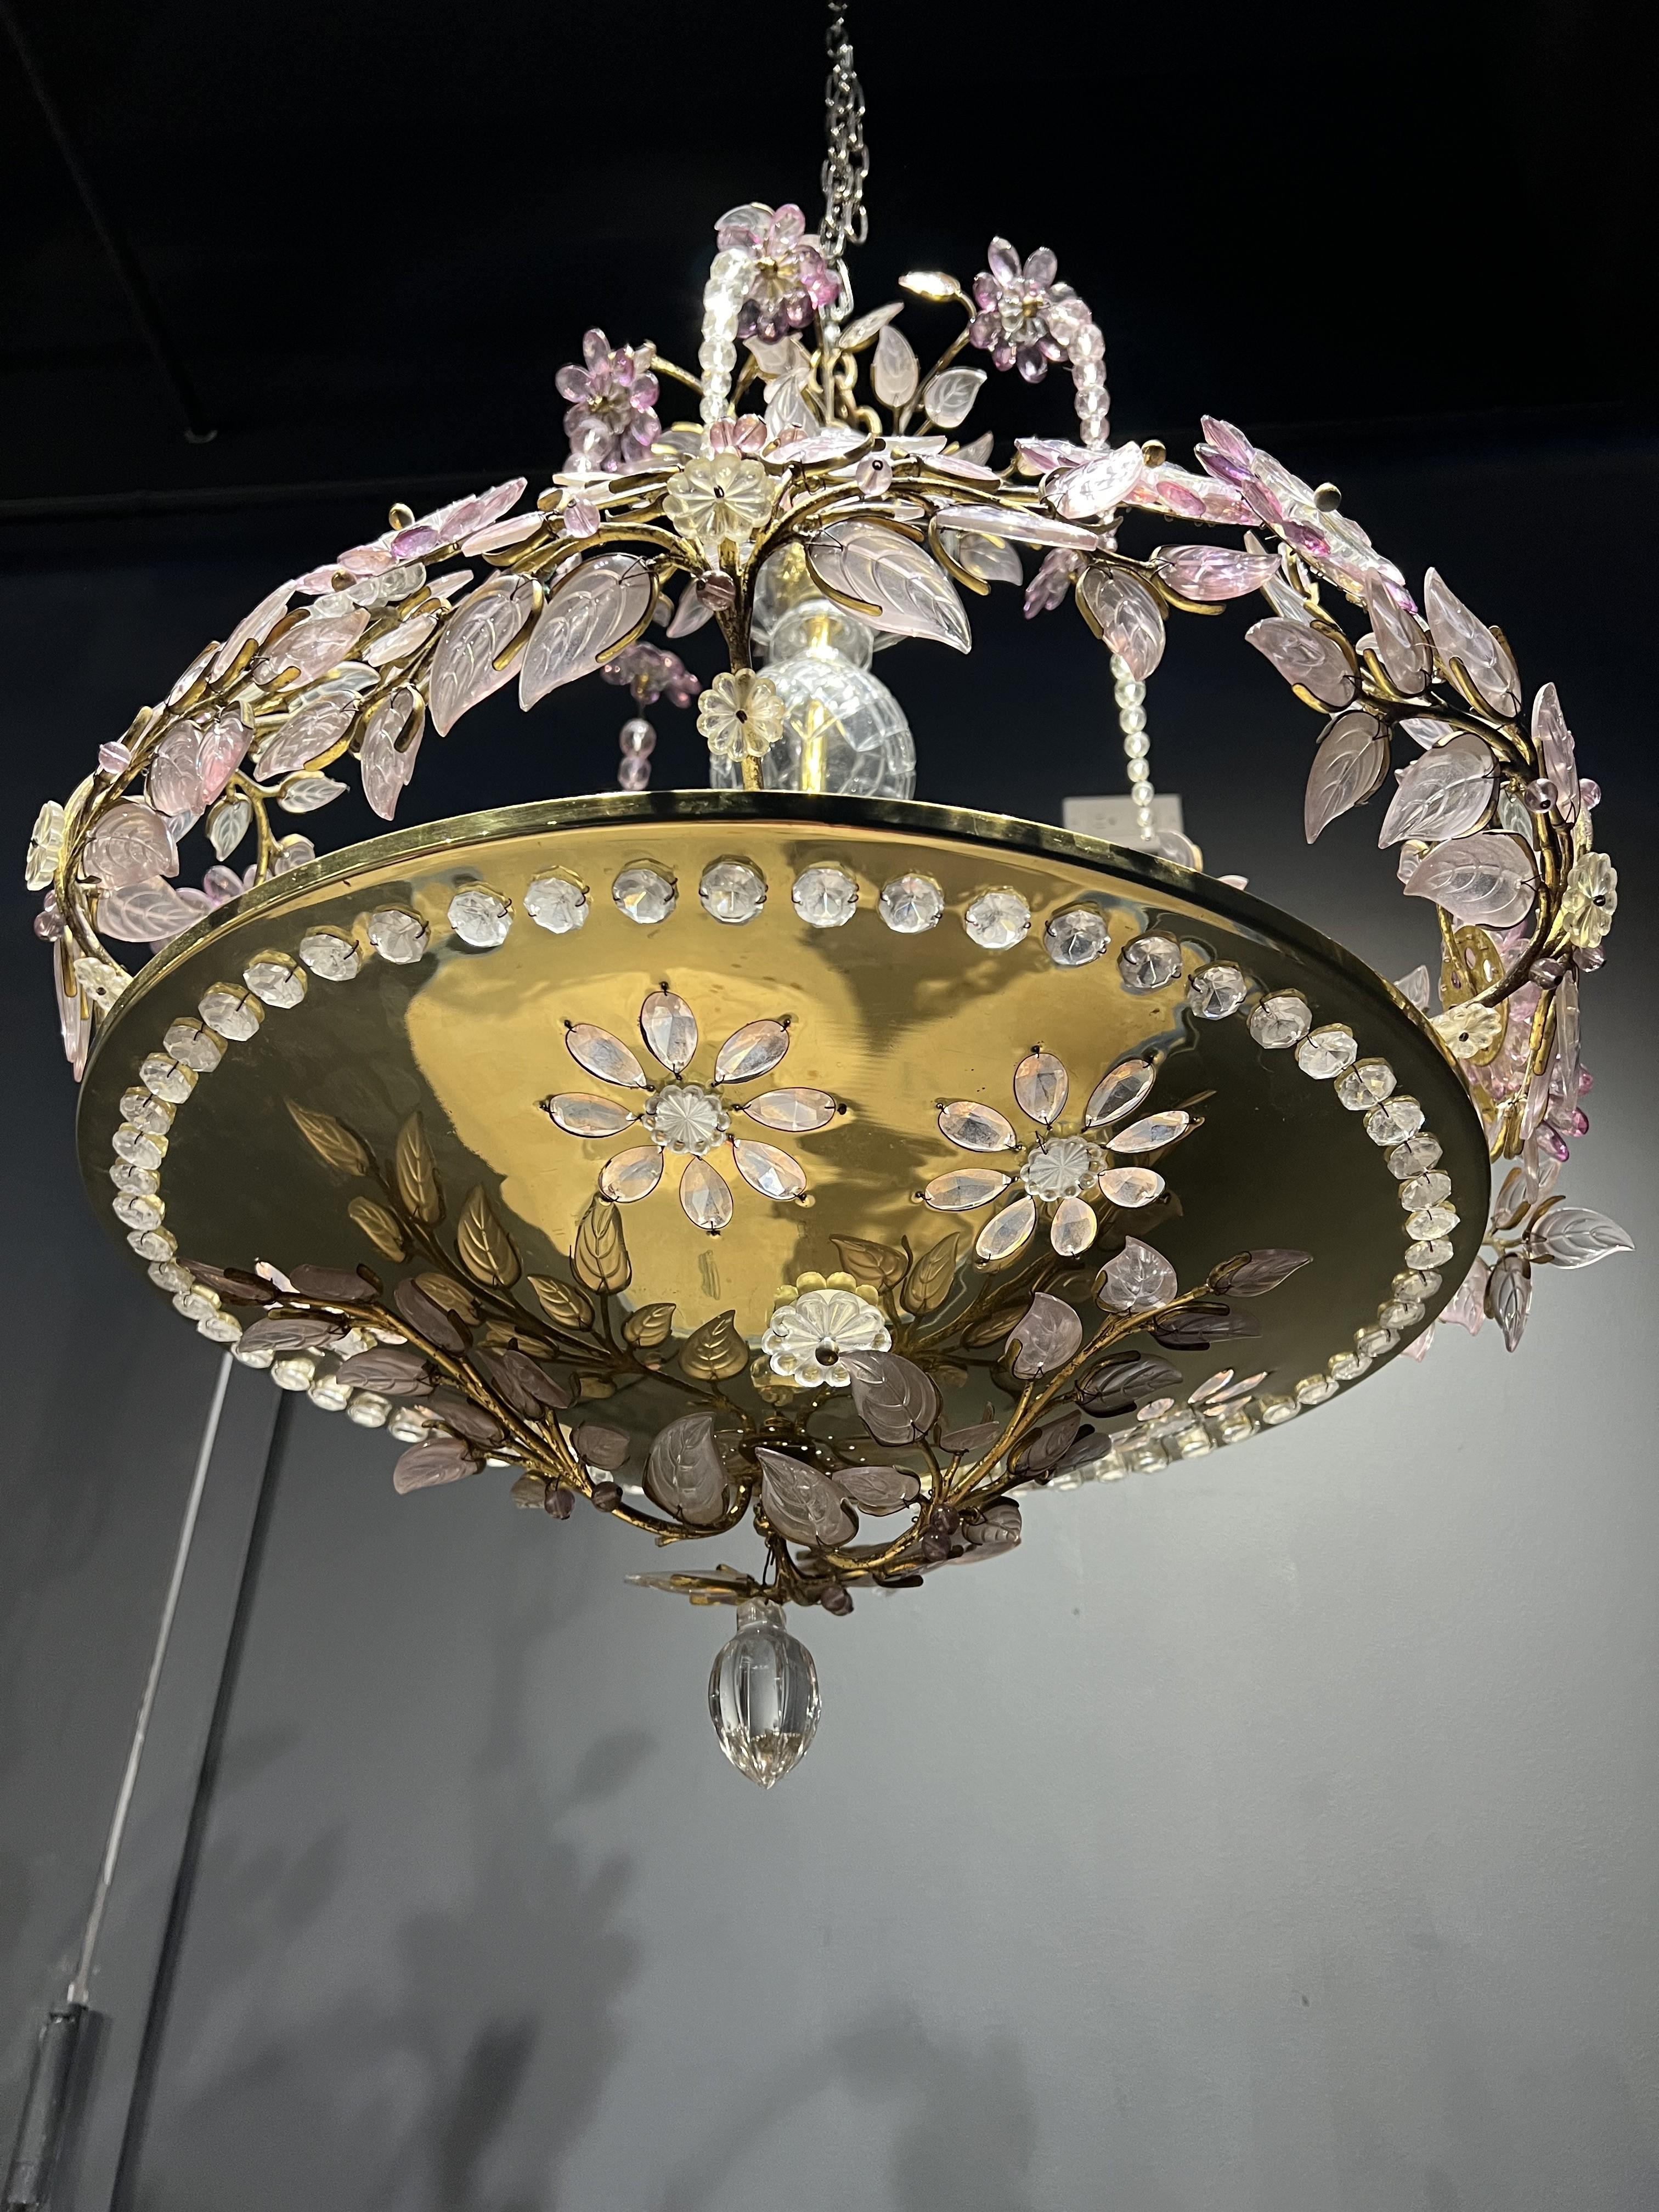 French Provincial 1930's French Bagues Light Fixture with White and Amethyst glass  For Sale